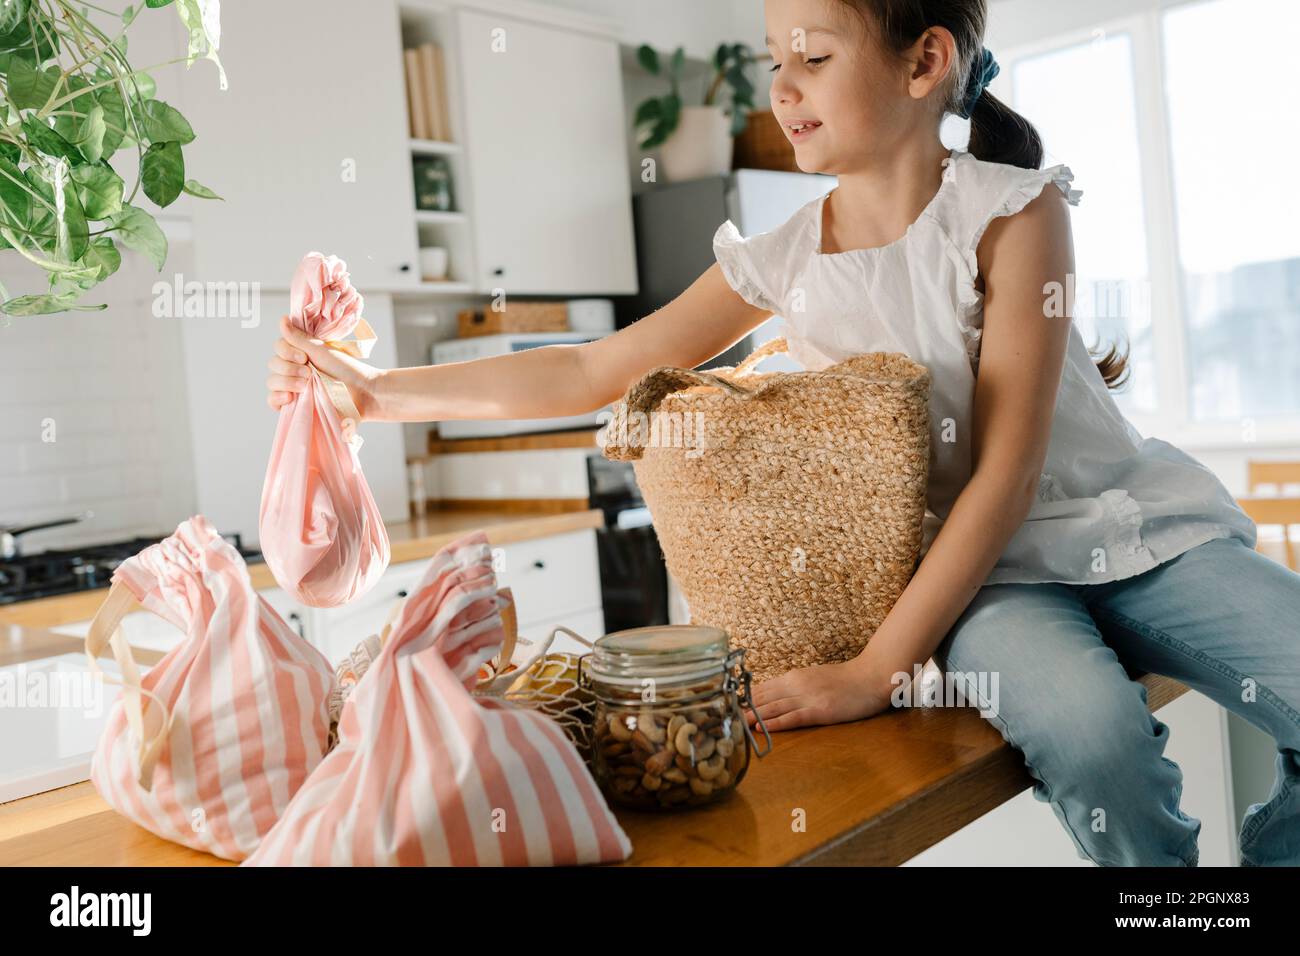 Girl with reusable bags sitting on kitchen island Stock Photo